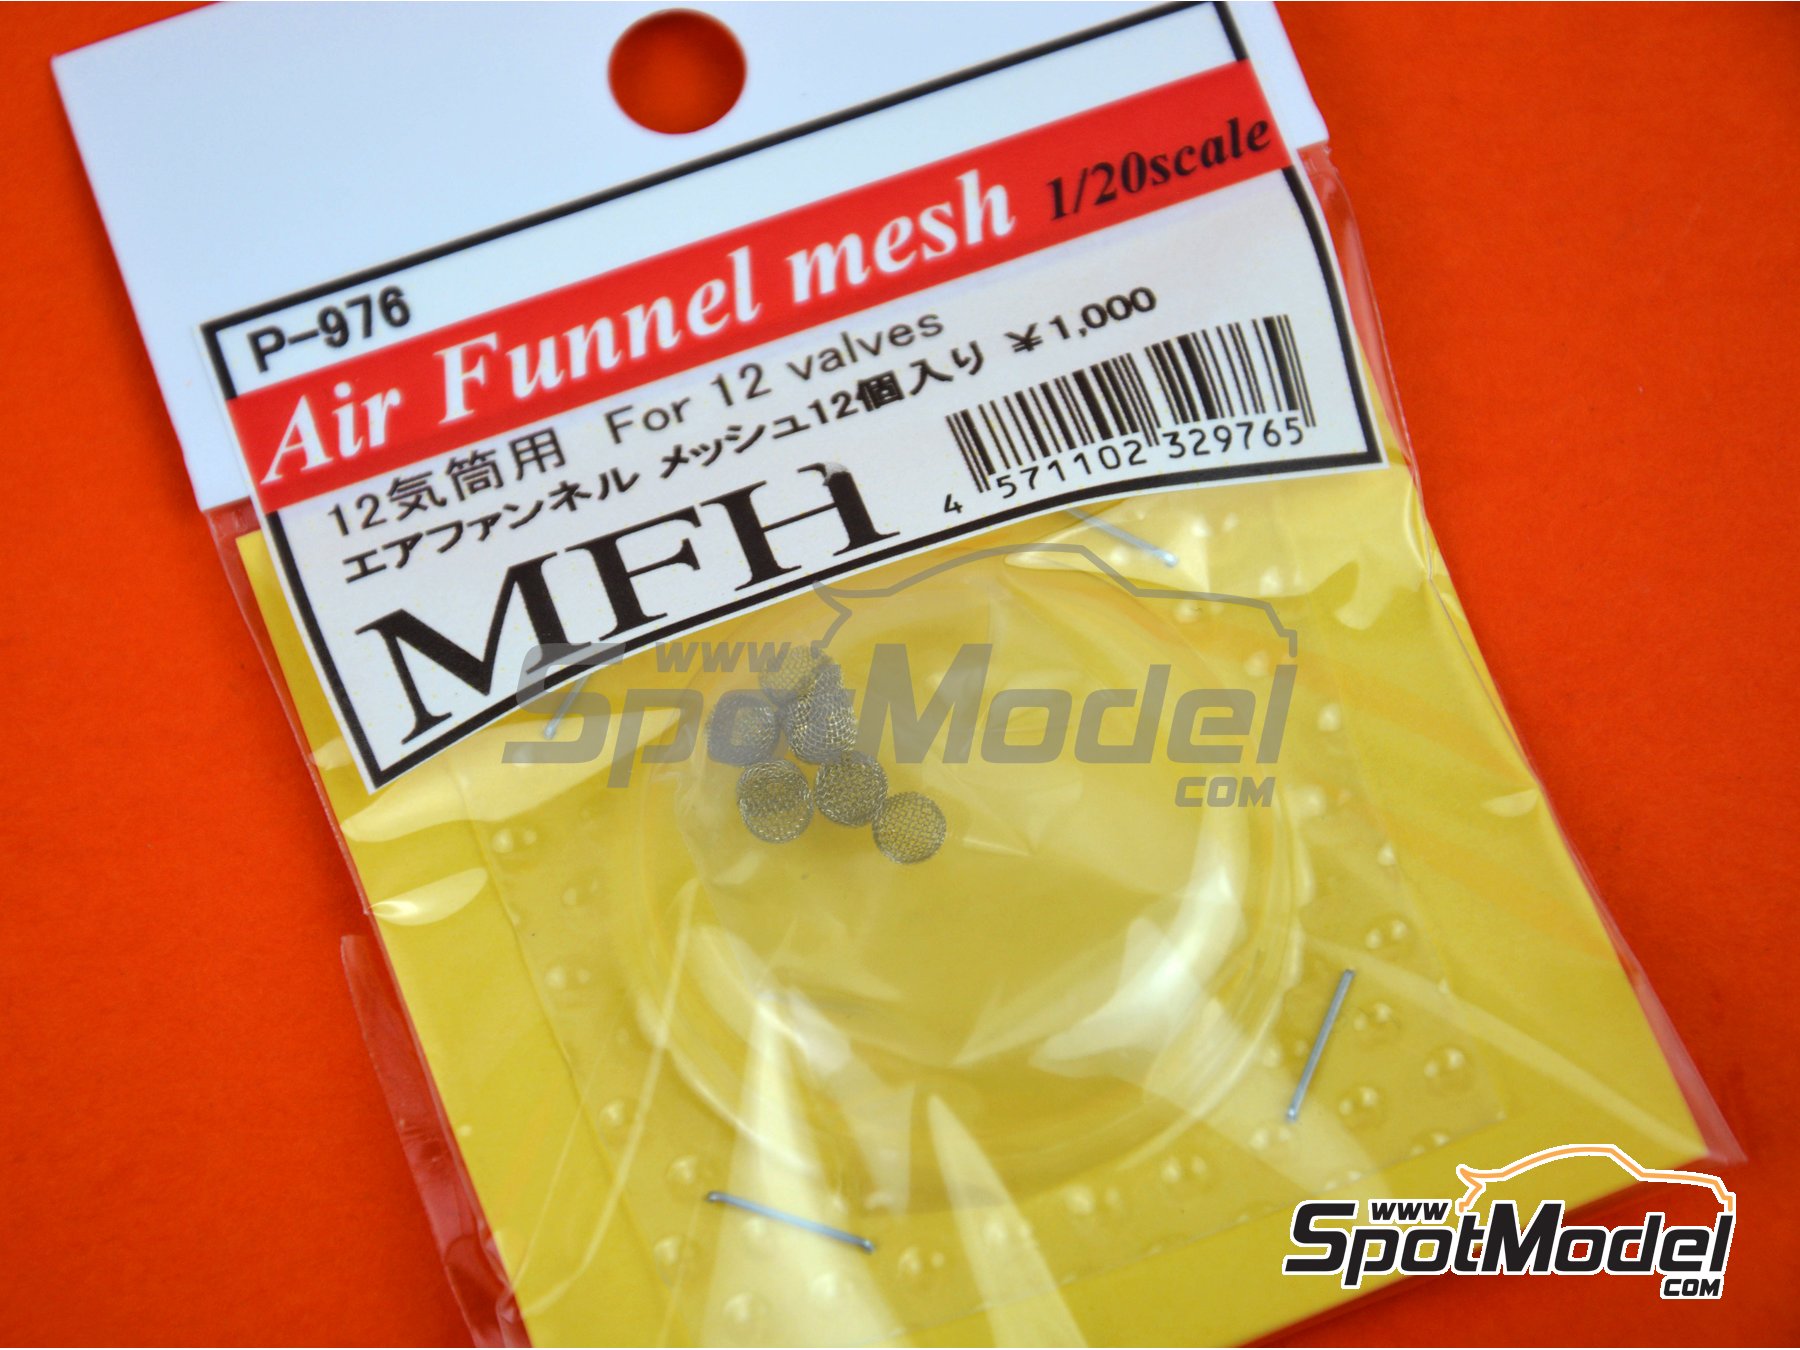 Air Funnel Mesh for 12 cylinder engines. Mesh in 1/20 scale manufactured by  Model Factory Hiro (ref. MFH-P976, also 4571102329765 and P976)